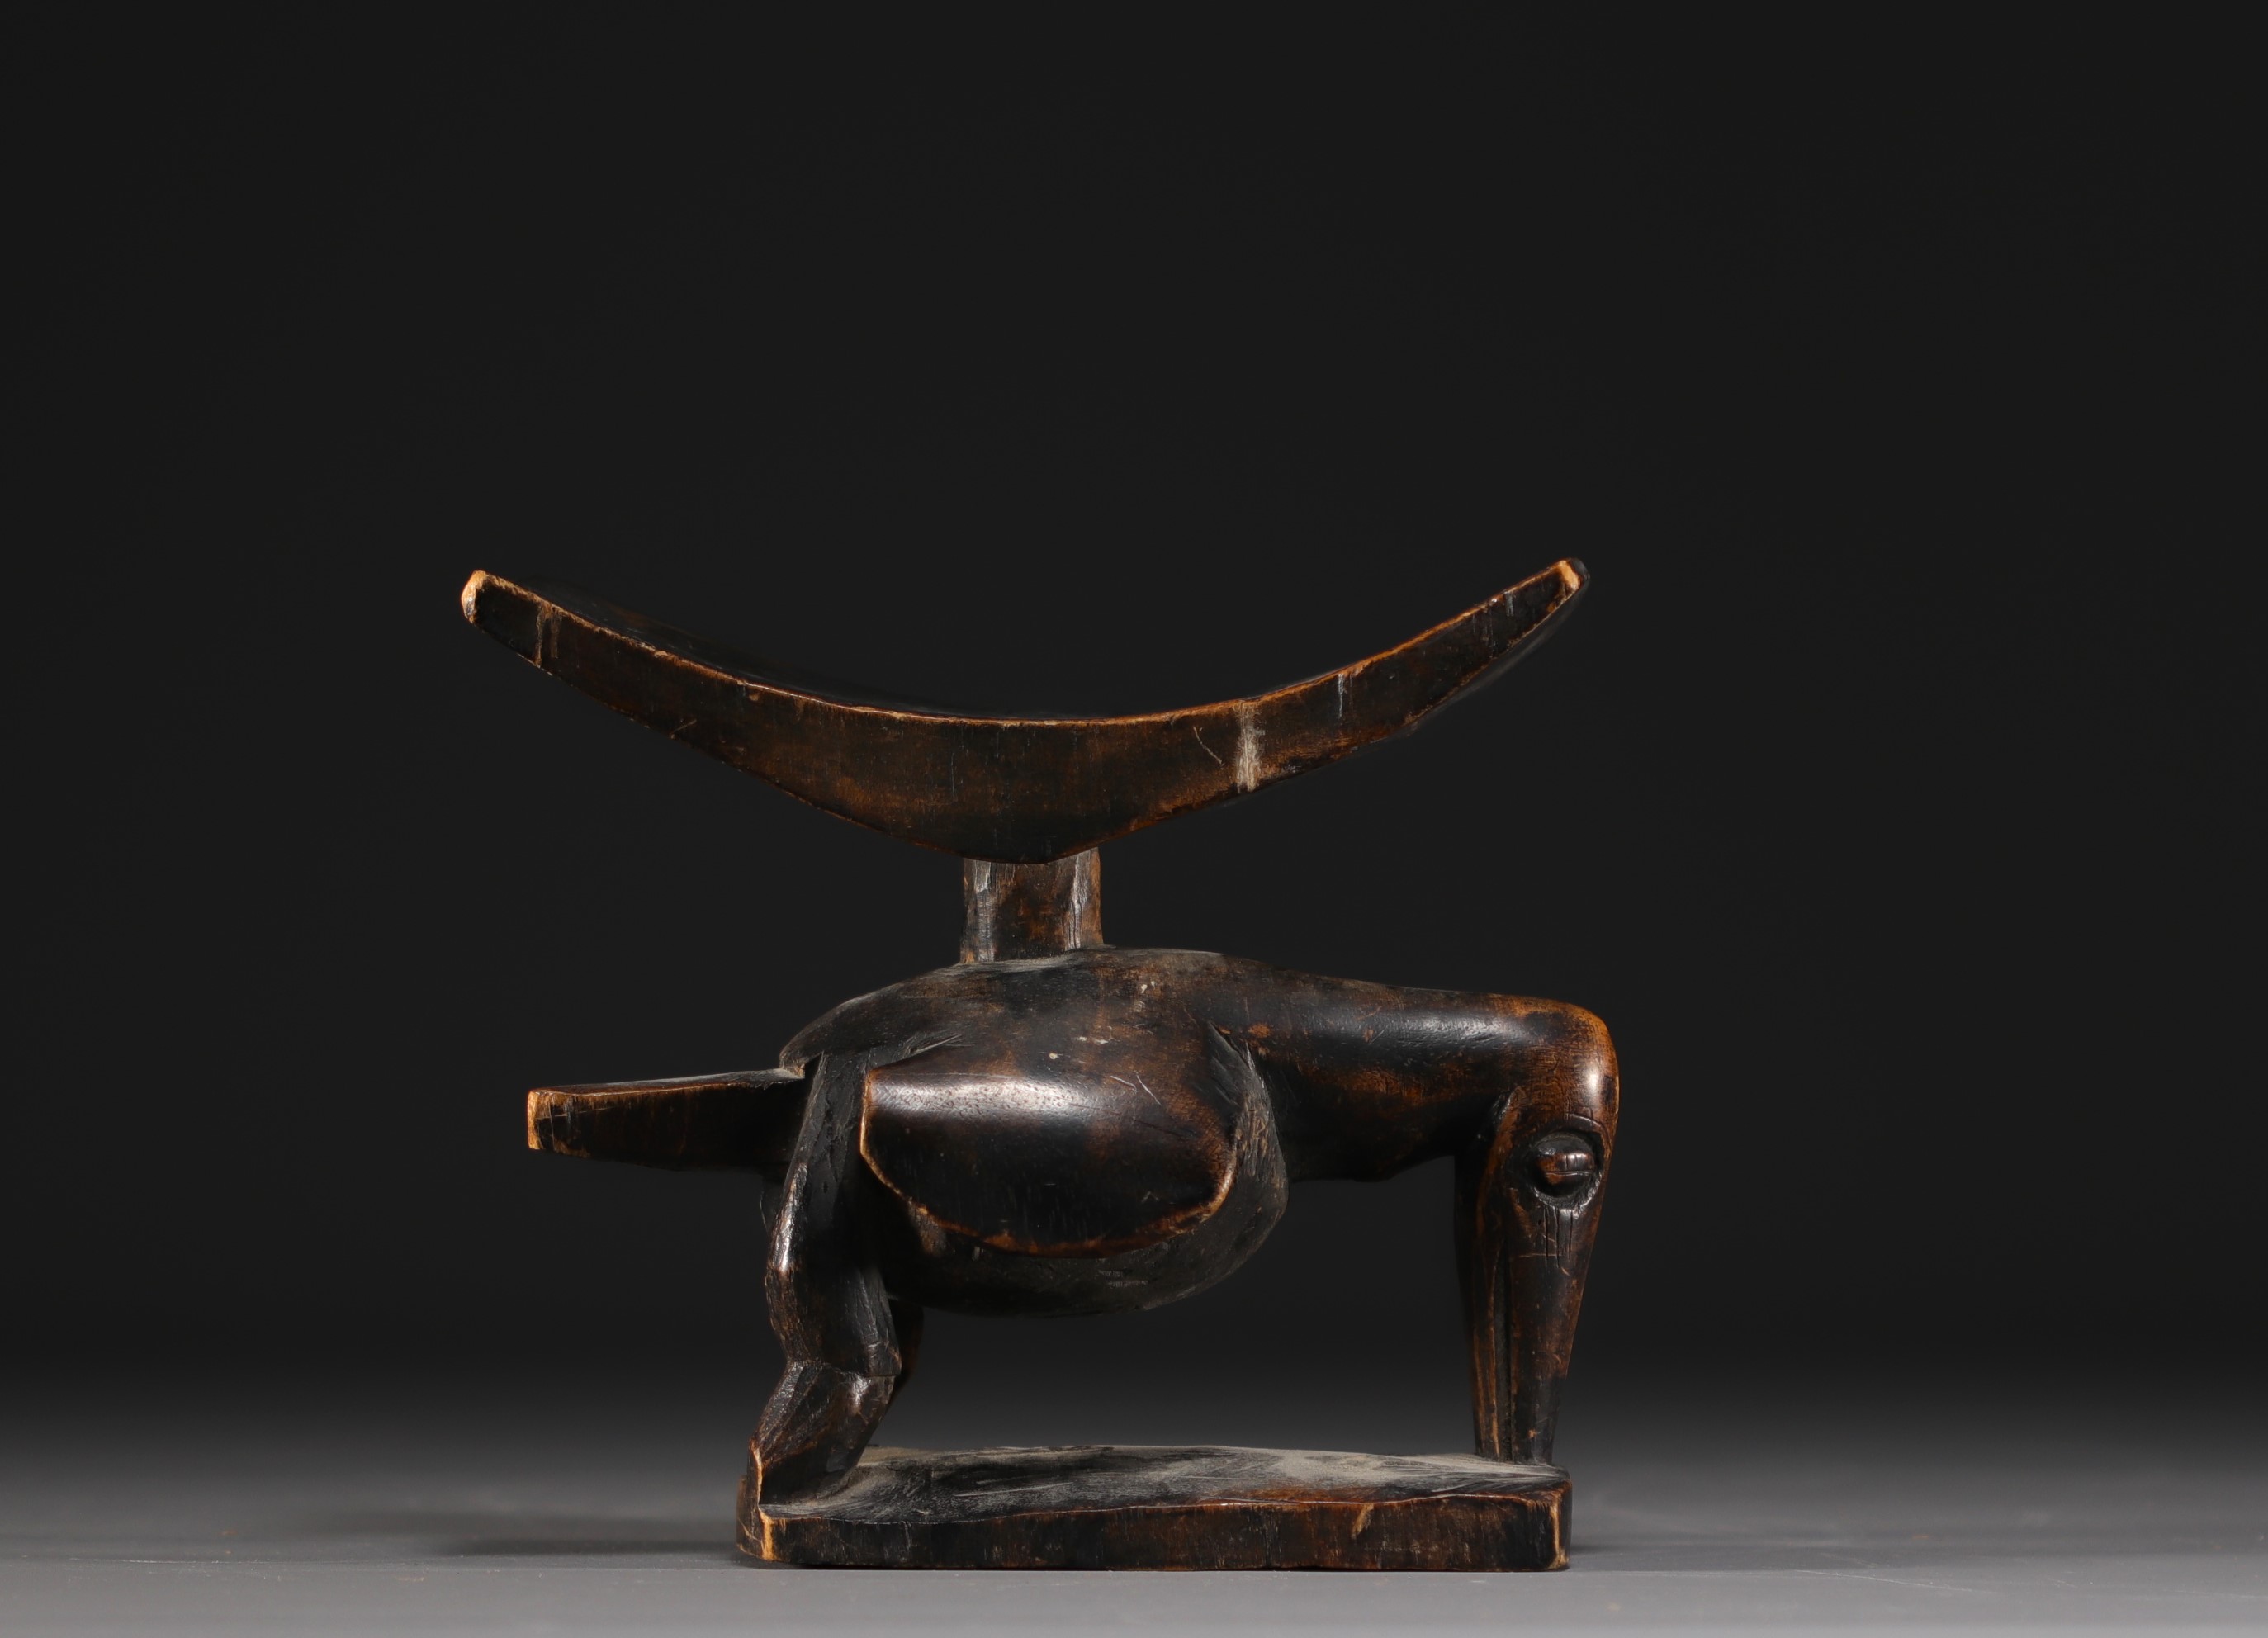 Africa - Neck rest carved in the shape of a bird.